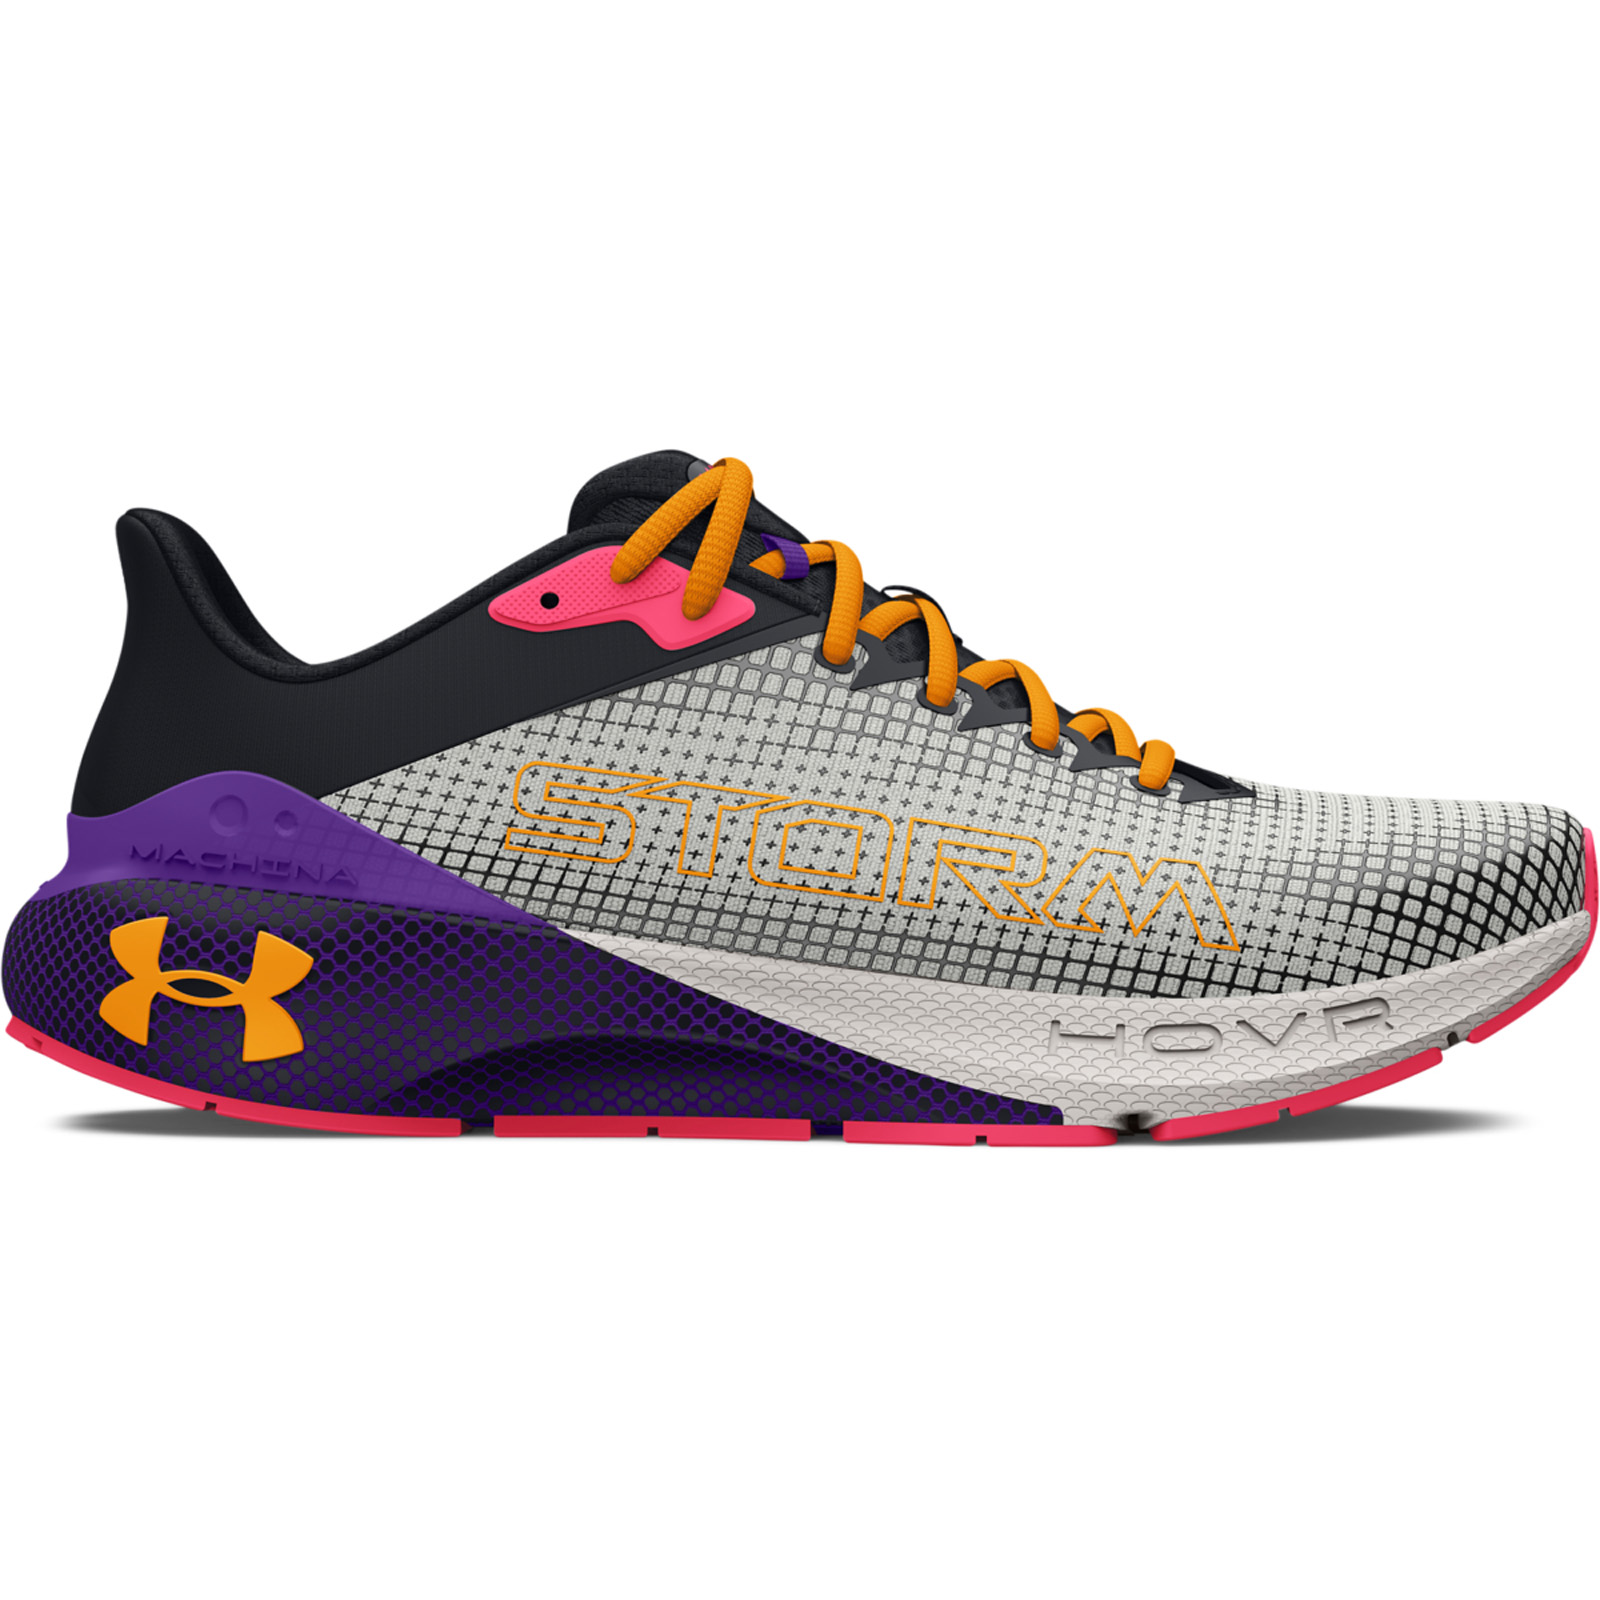 Under Armour - Men's UA Machina Storm Running Shoes - White Clay/White Clay/Formula Orange Ανδρικά > Παπούτσια > Αθλητικά > Παπούτσι Low Cut